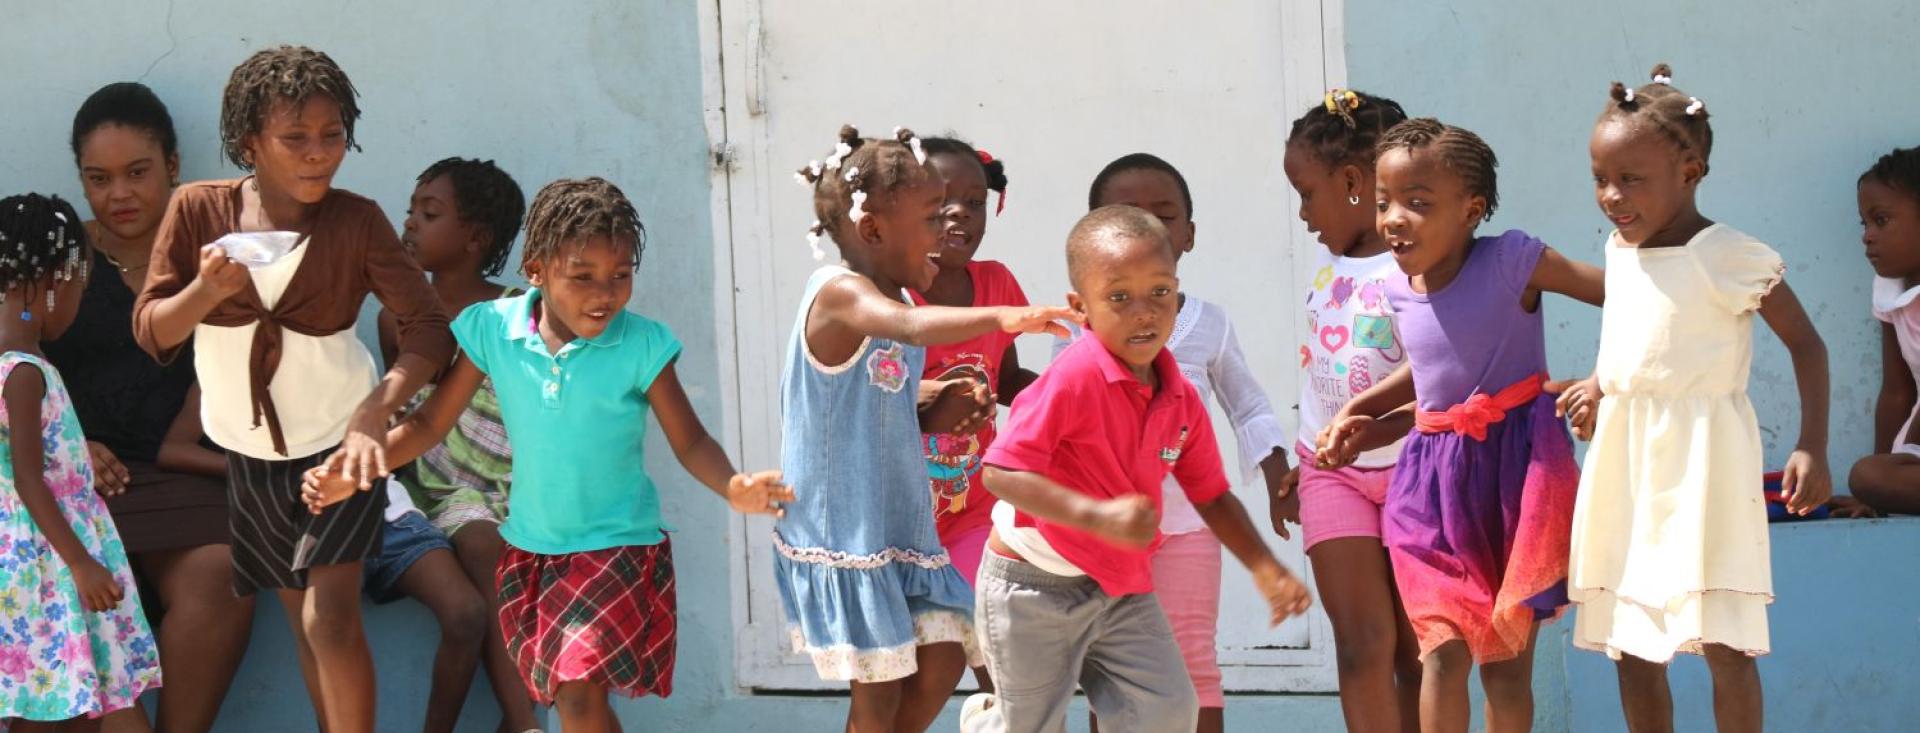 An action shot of several young joyful Black children holding hands in front of a pale blue wall